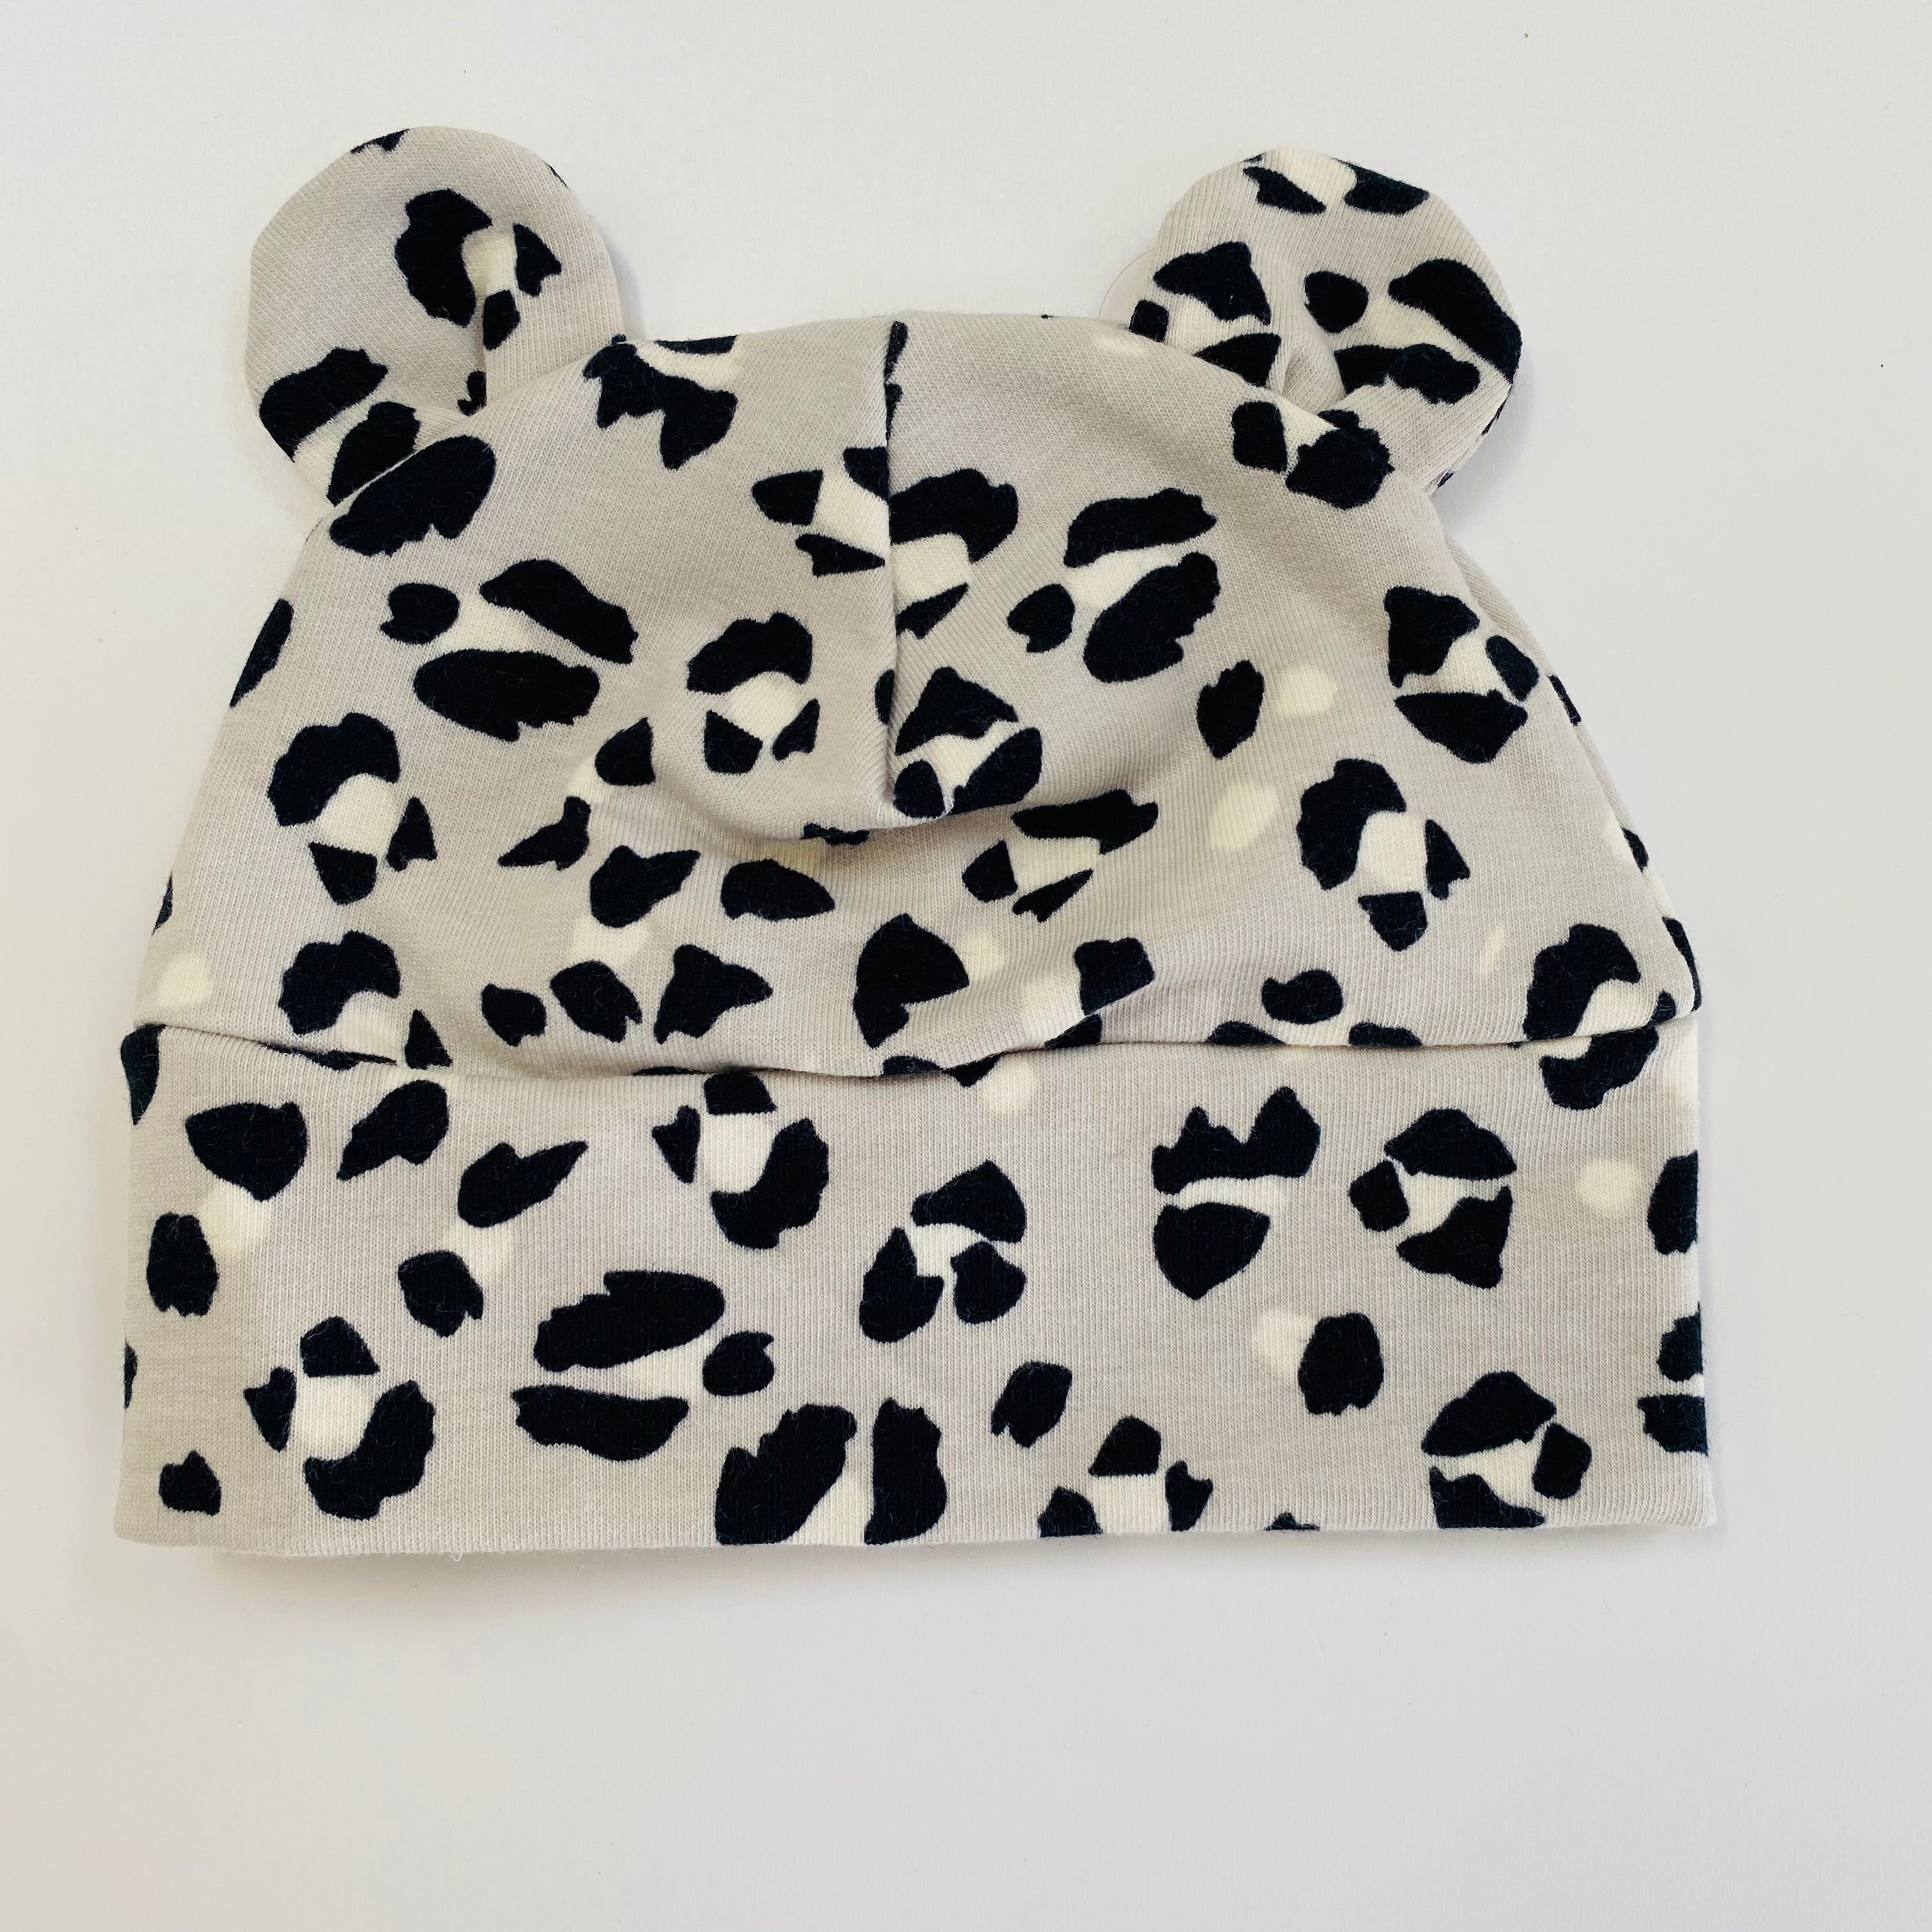 Eddie & Bee organic cotton Baby hat with ears  in Grey " Snow Leopard spot" print.